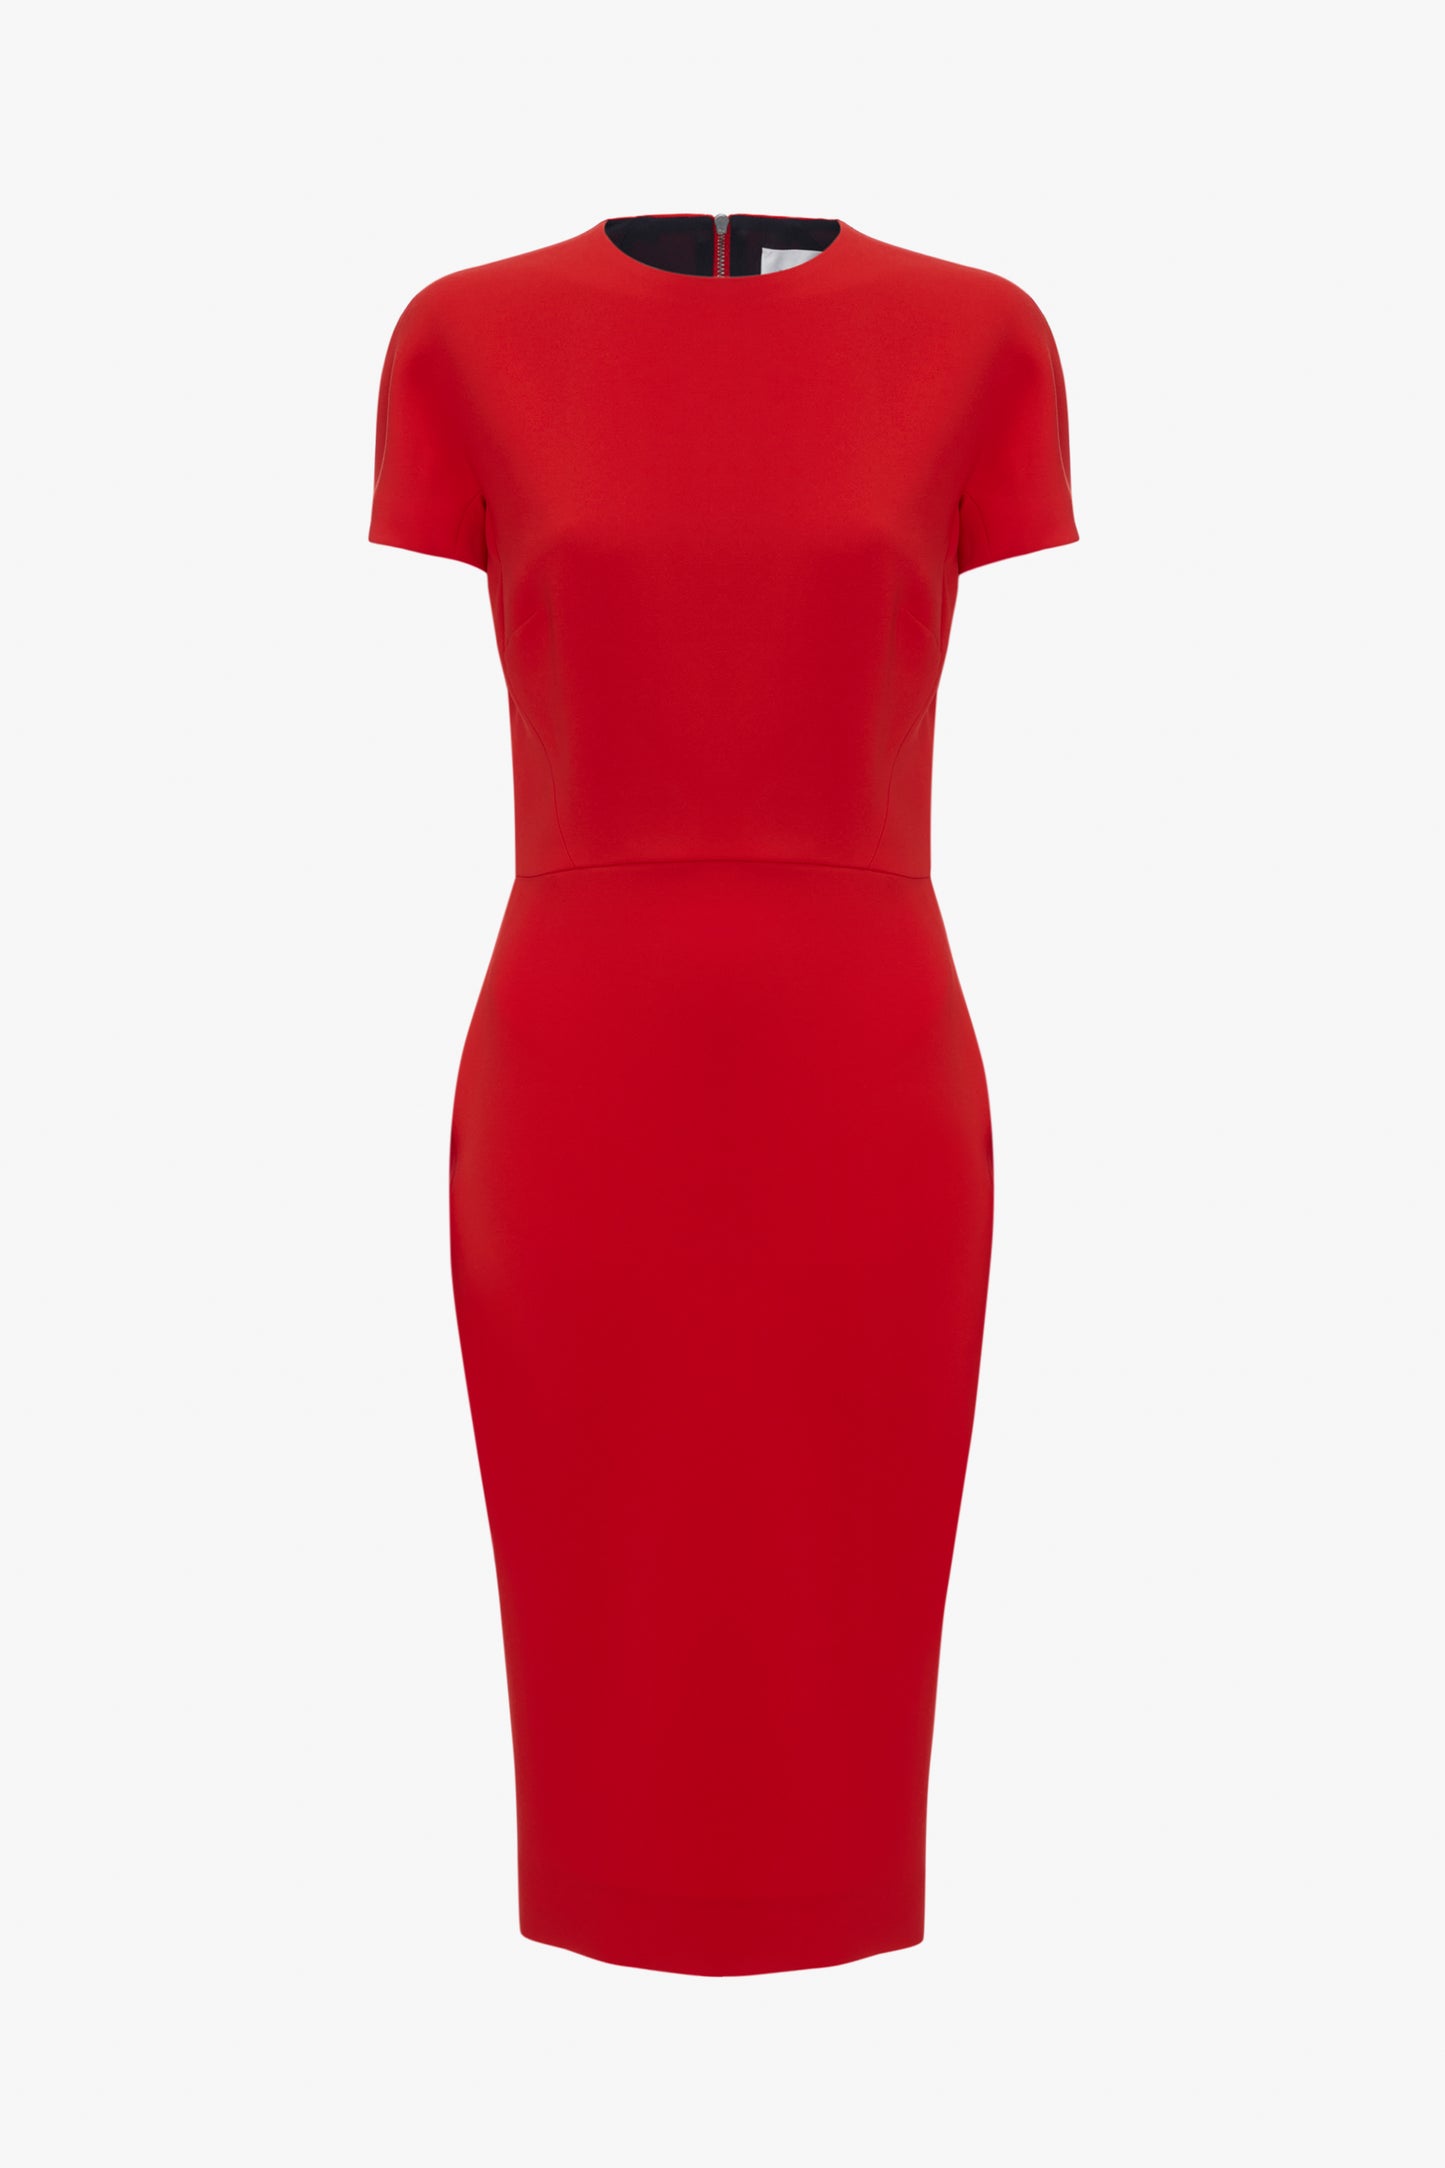 Victoria Beckham's bright red knee-length fitted T-shirt dress with short sleeves and a round neckline, isolated on a white background.